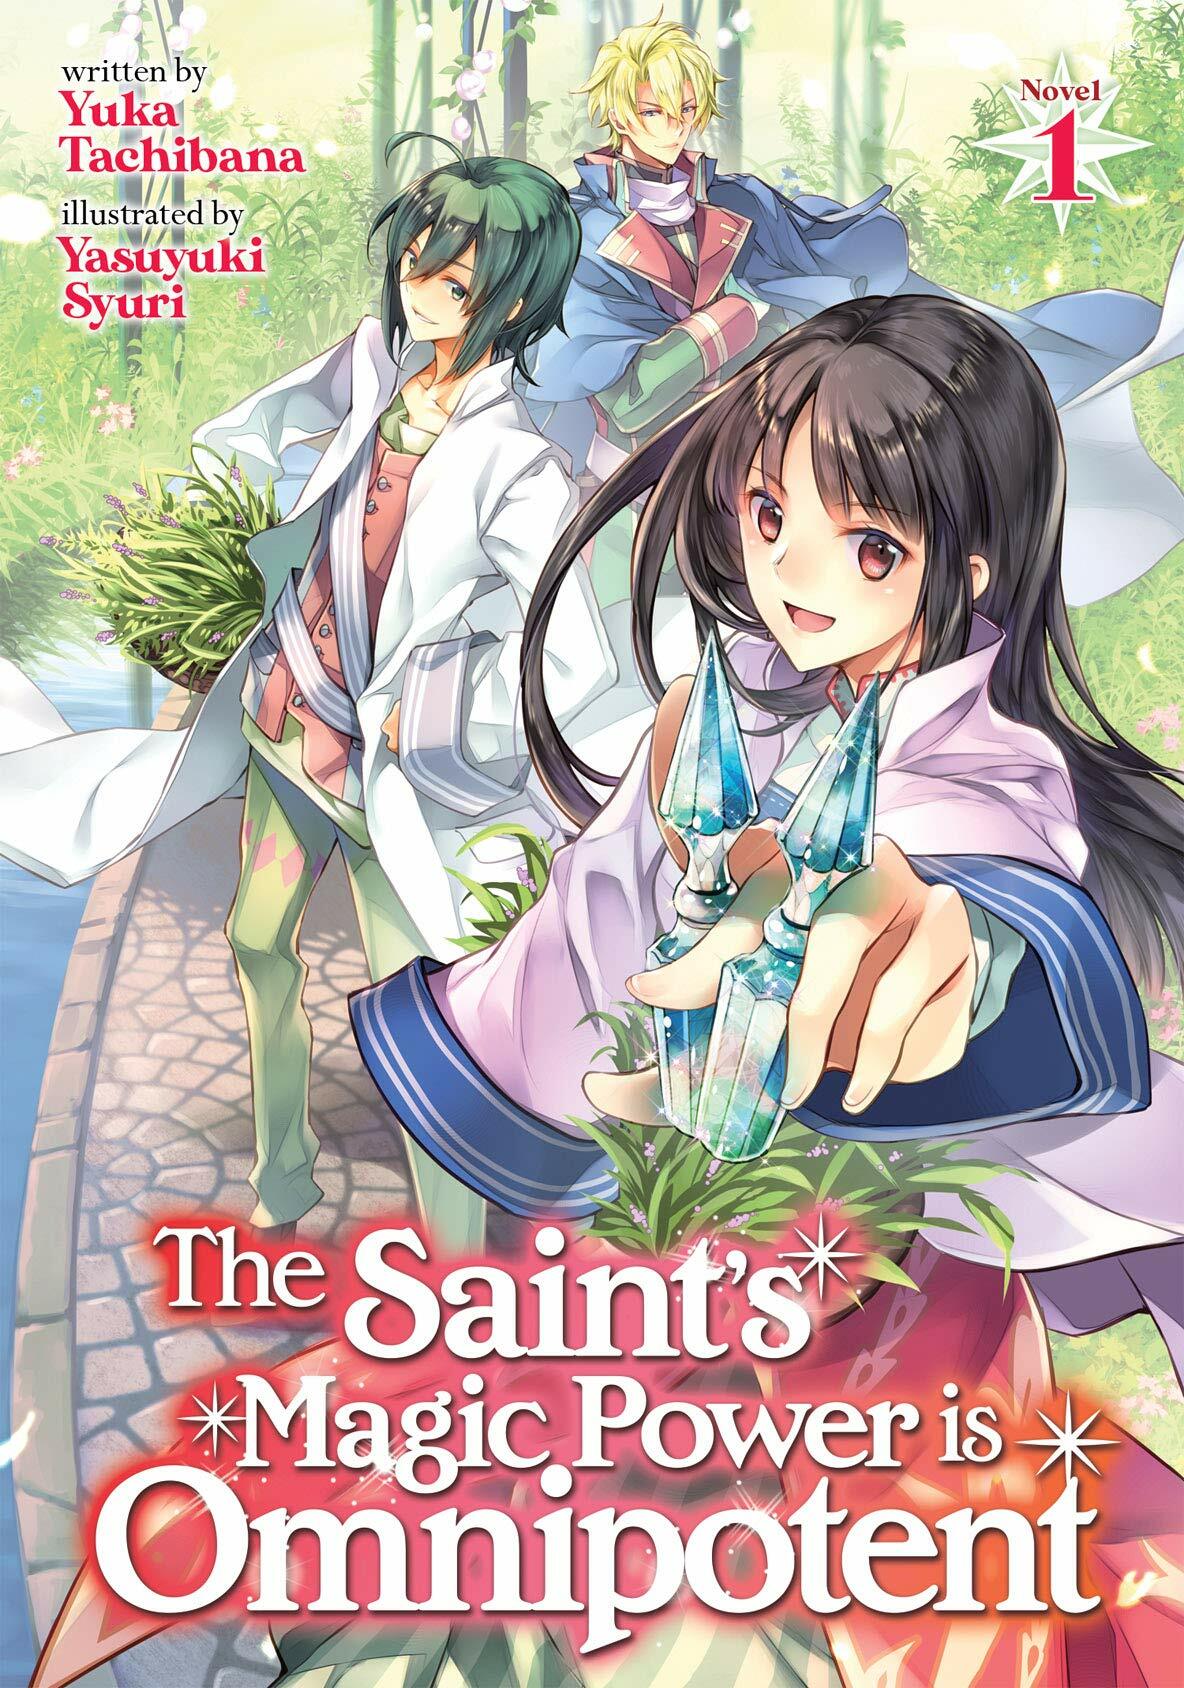 The Saint's Magic Power is Omnipotent screenshots, image and picture